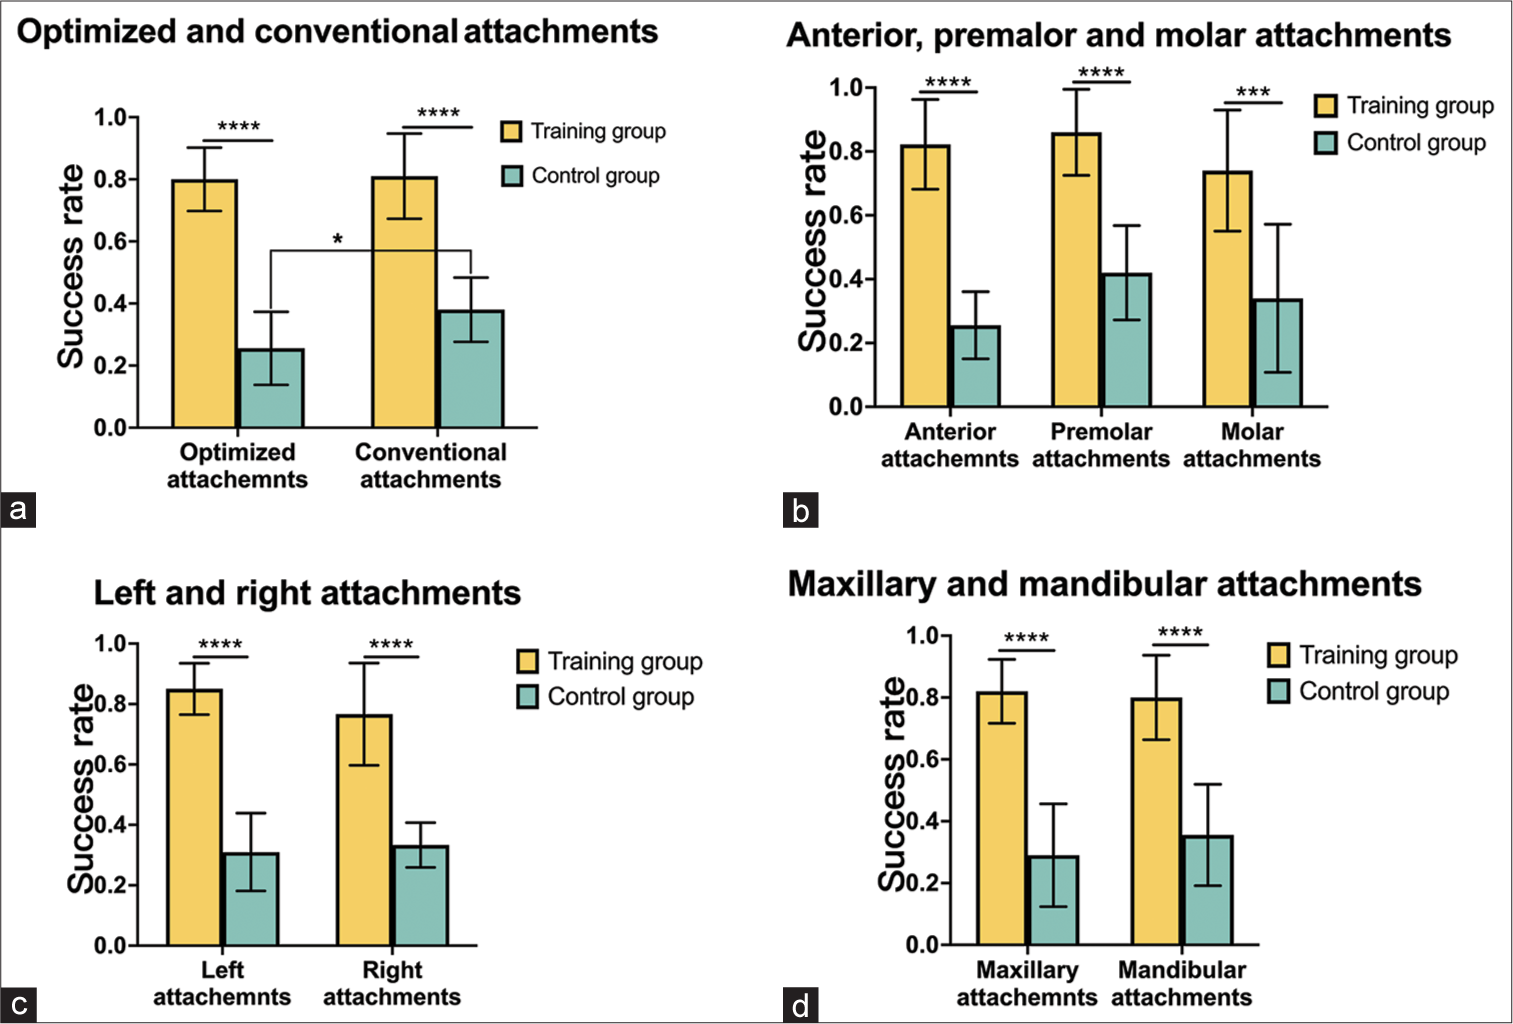 Comparison of the success rate of different attachments between the training group and control group. (a) Optimized and conventional attachments, (b) anterior, premolar, and molar attachments, (c) left and right attachments, and (d) maxillary and mandibular attachments. *P < 0.05, ***P < 0.001, ****P < 0.0001.